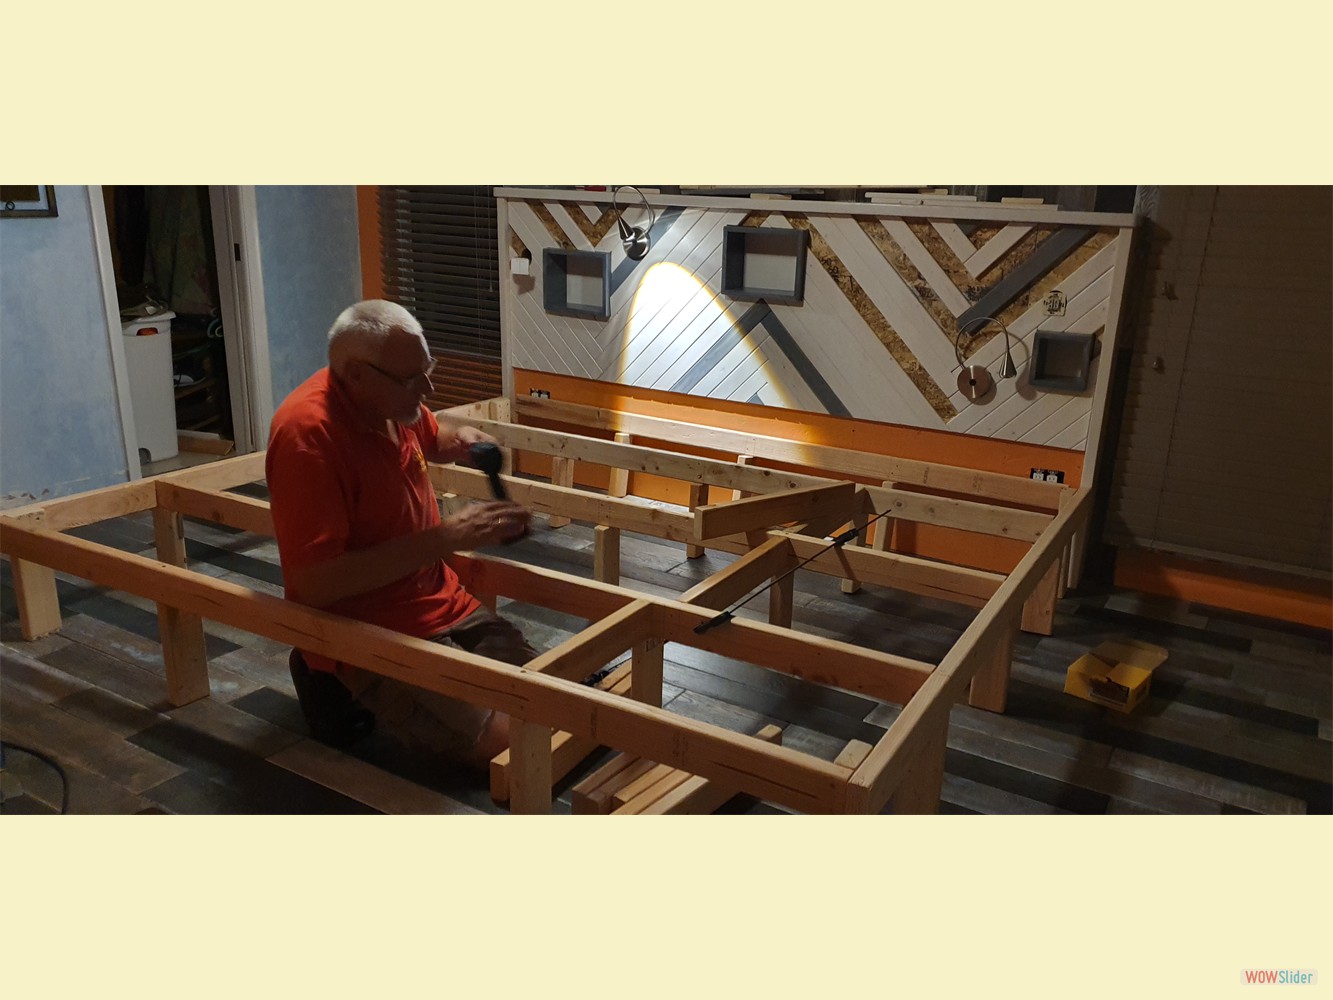 Juergen is putting together the base construction of the new bed ...